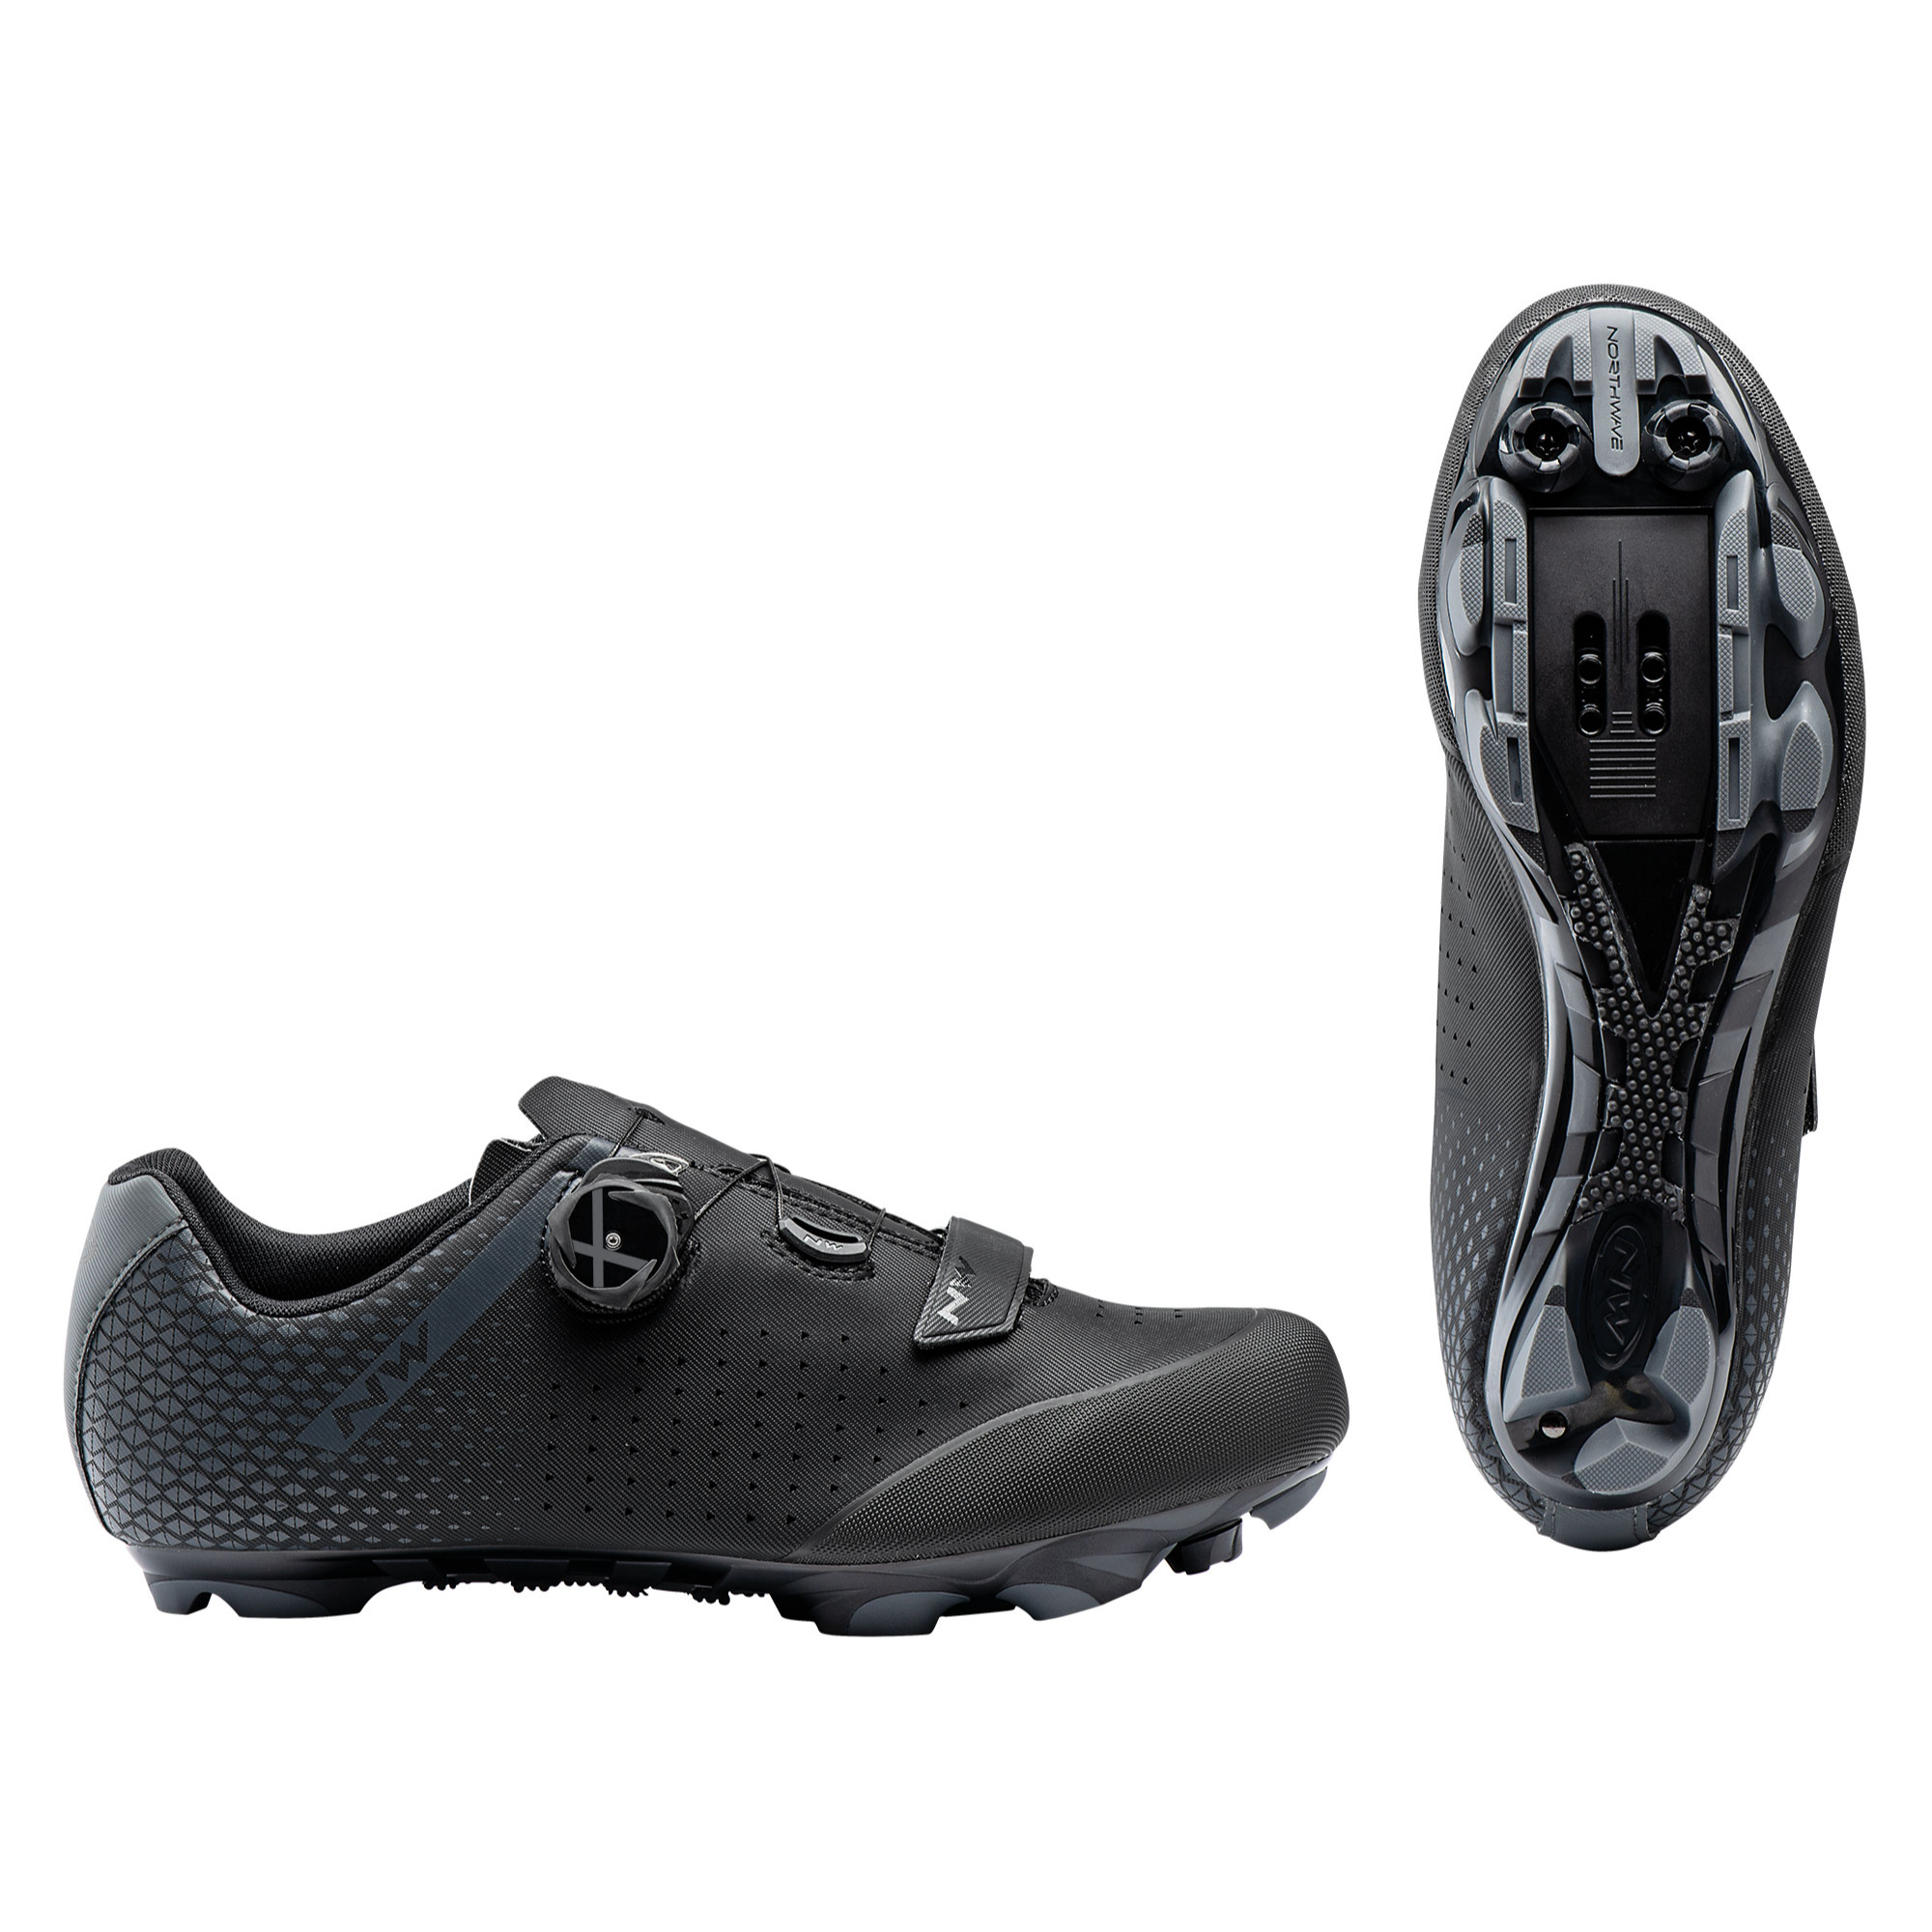 northwave cycling shoes